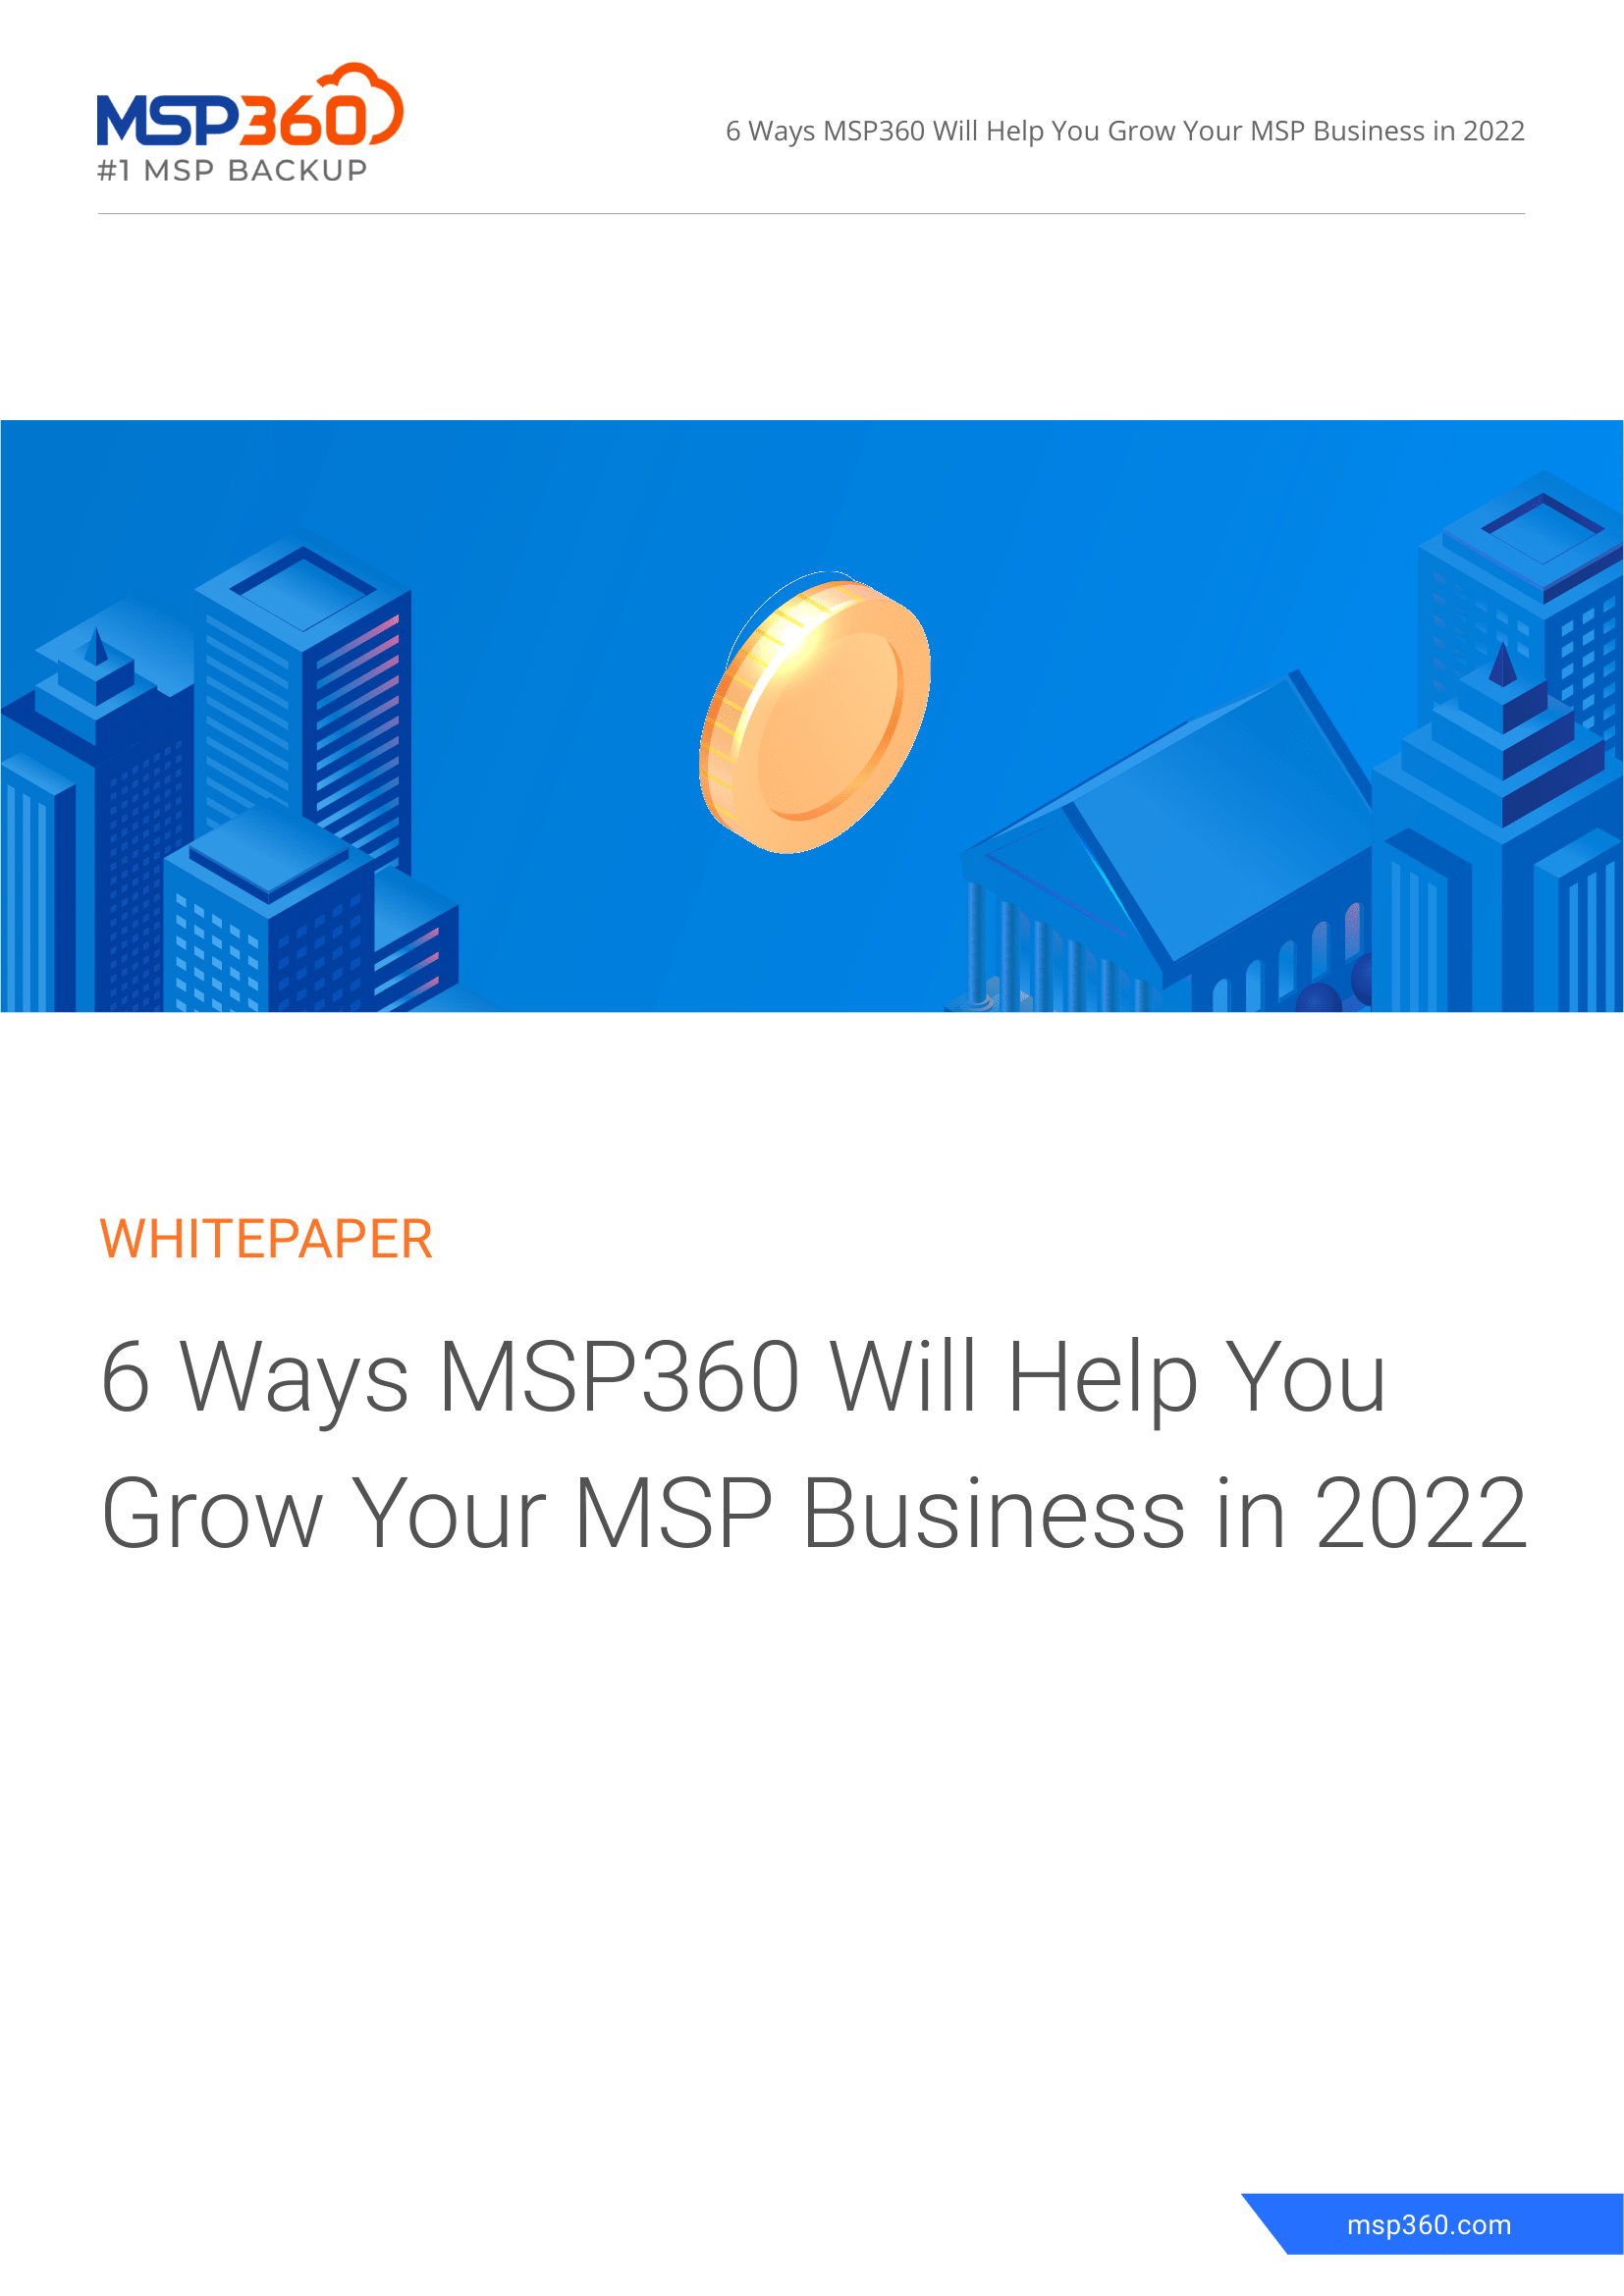 WP 6 Ways MSP360 Will Help You Grow Your MSP Business in 2022 (ENGL)-1-1